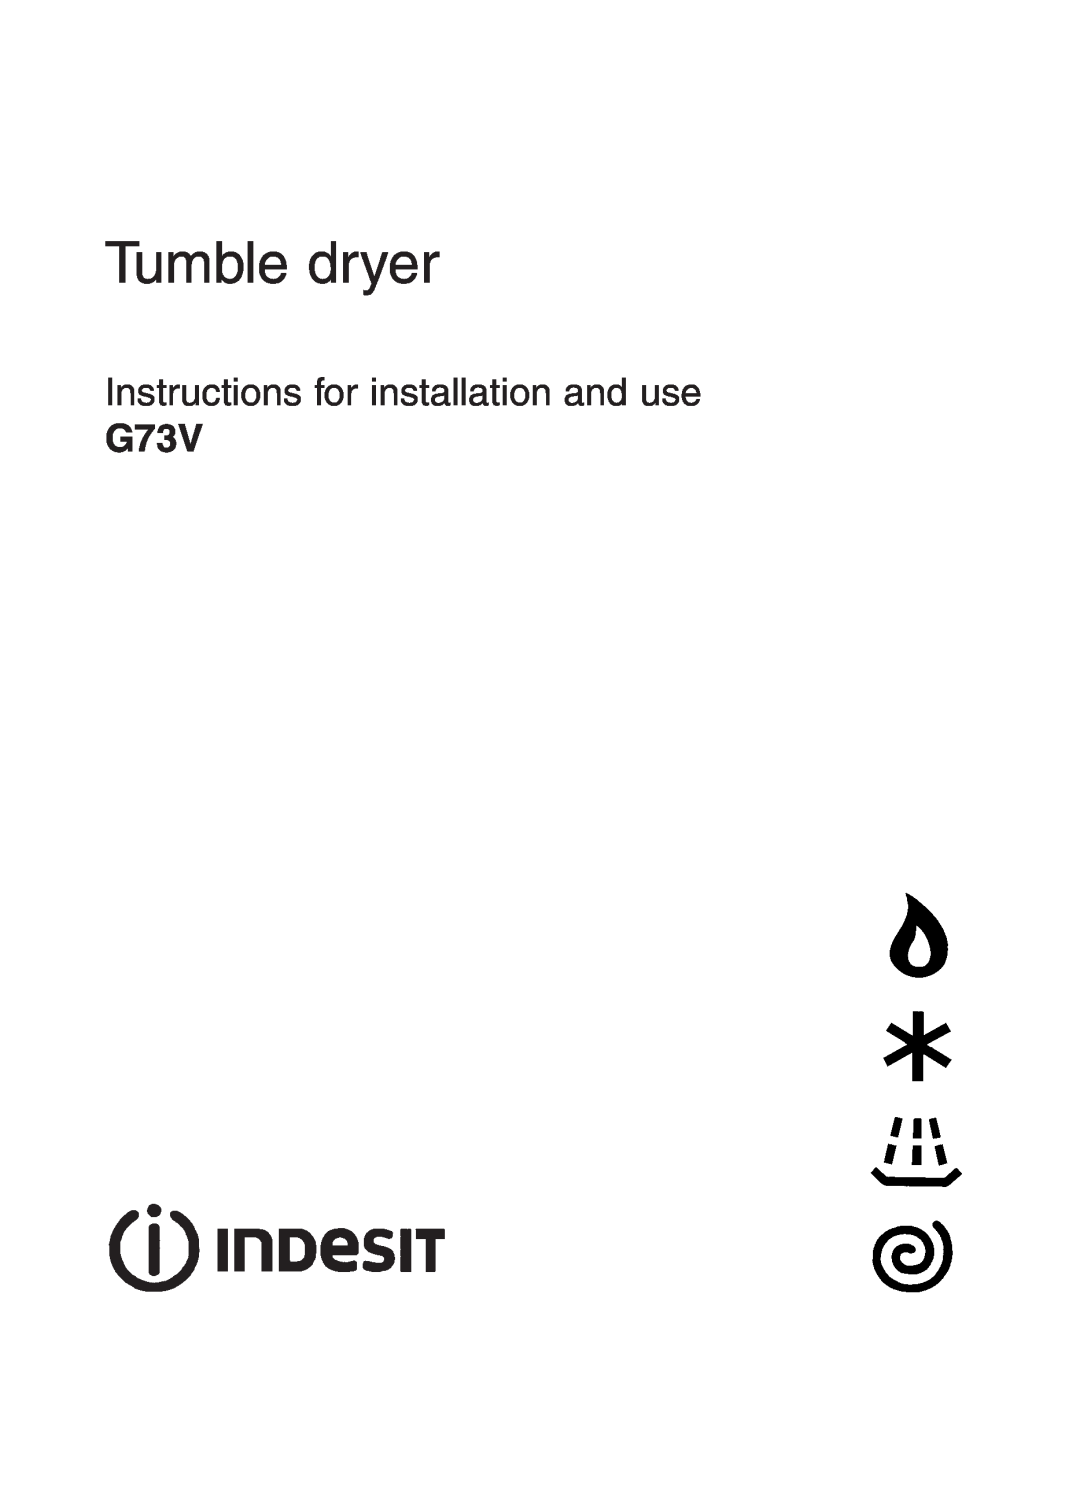 Indesit G73V manual Tumble dryer, Instructions for installation and use 